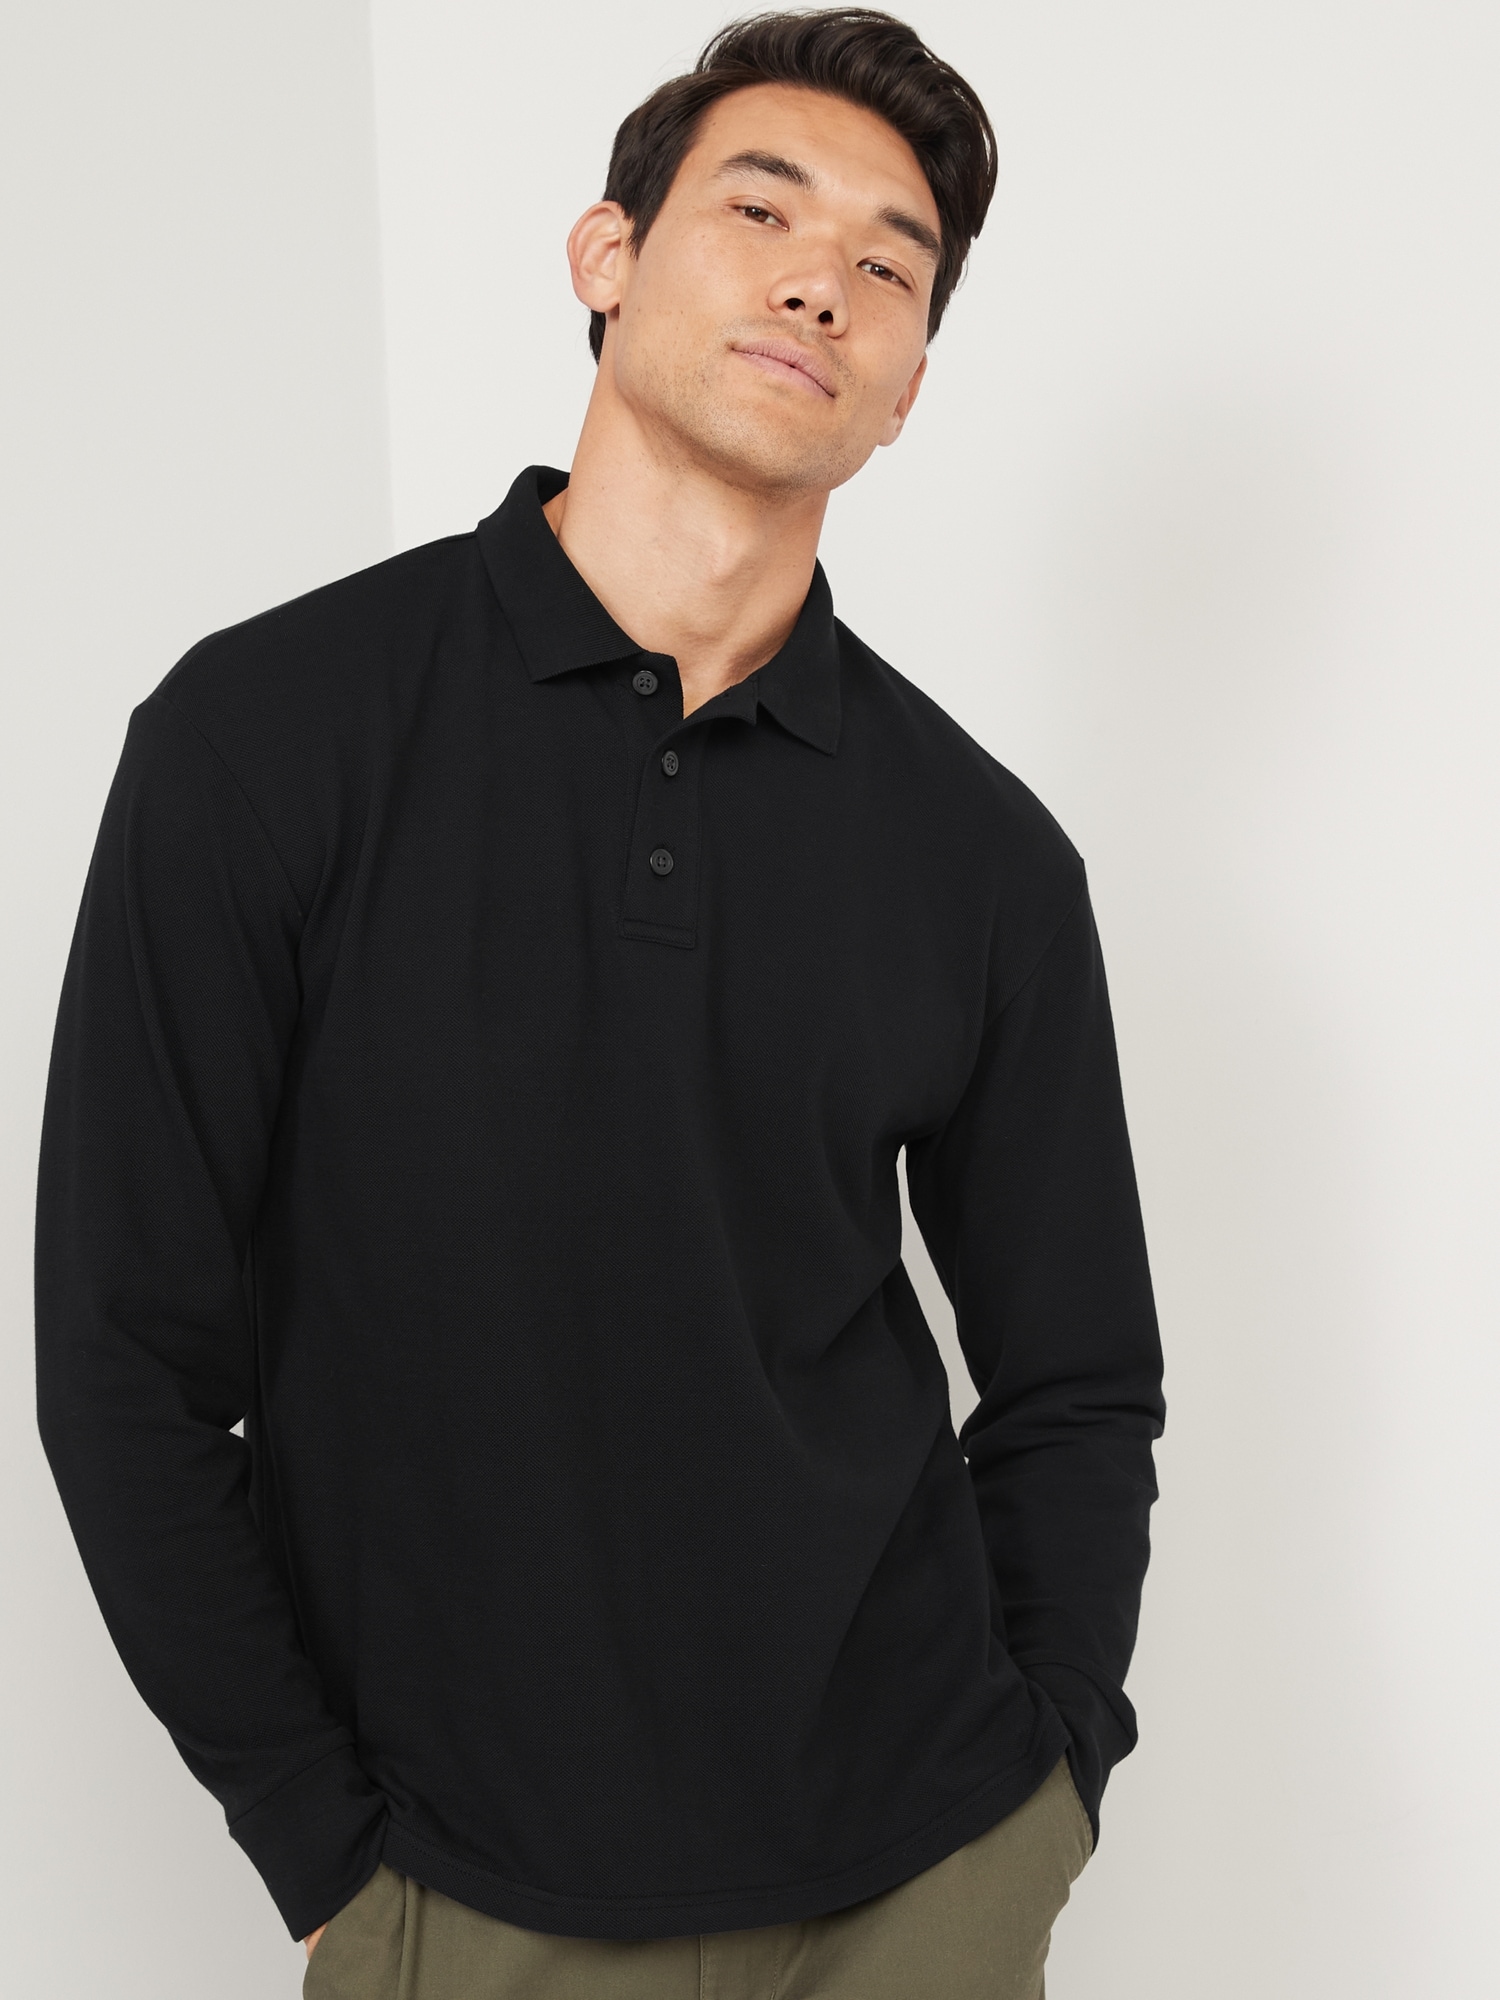 Old Navy Long-Sleeve Classic Fit Pique Polo for Men black. 1